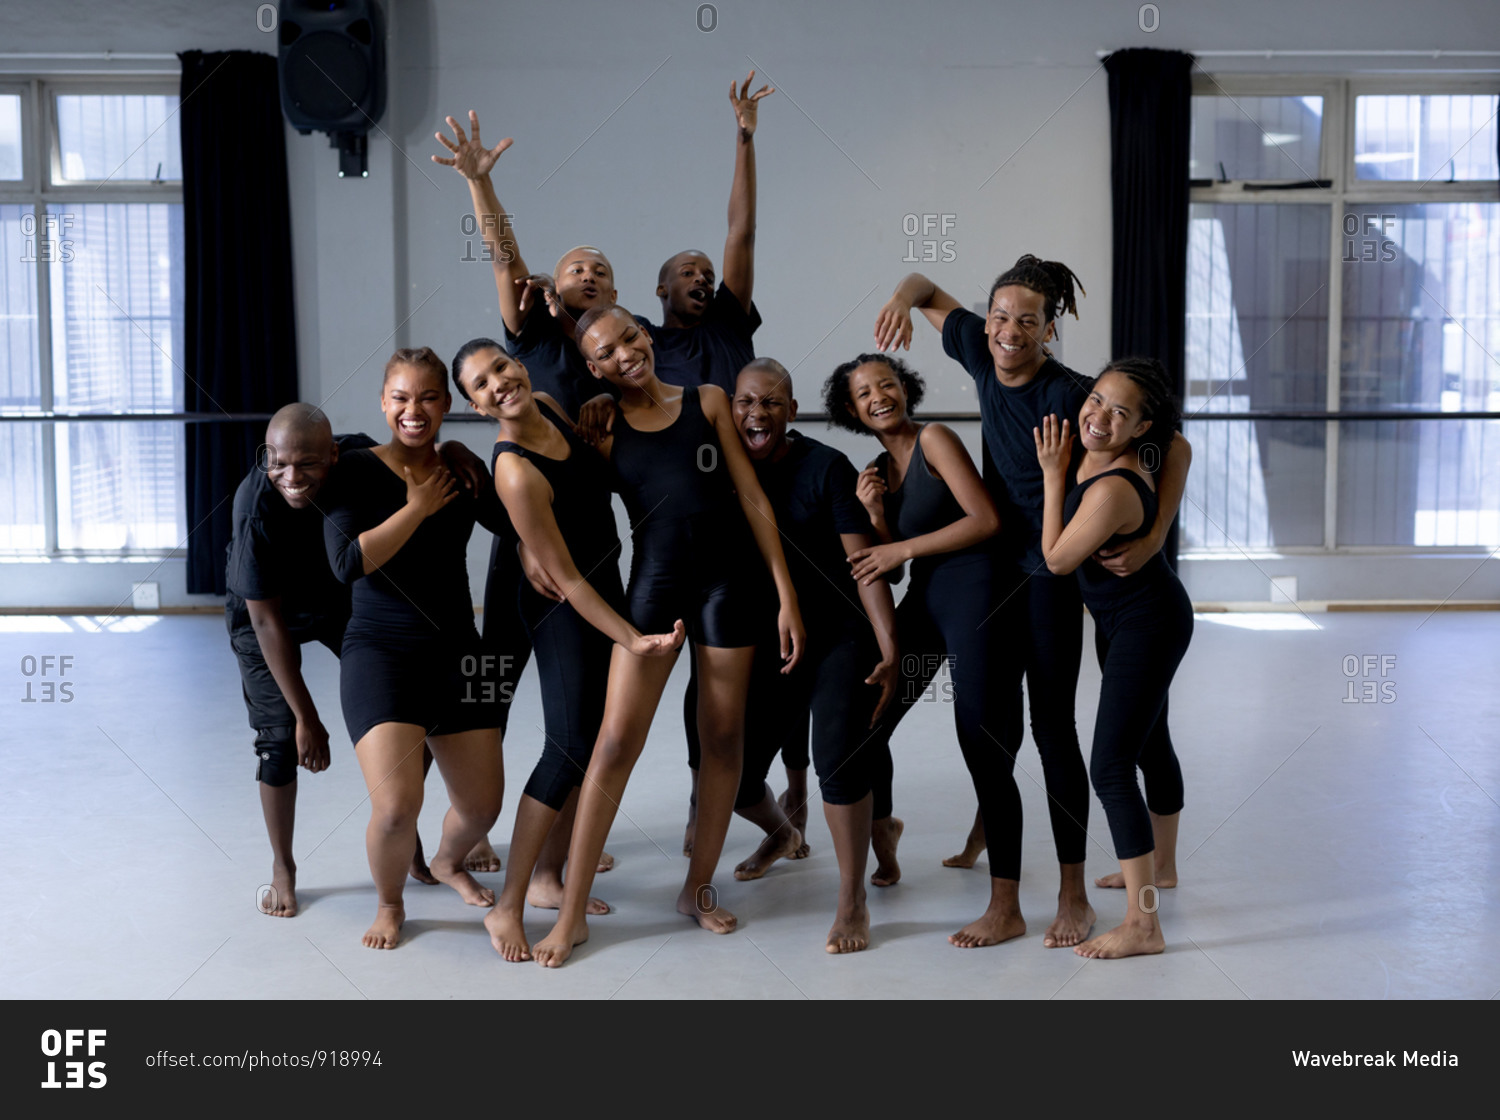 Front view of a multi-ethnic group of fit male and female modern dancers wearing black outfits practicing a dance routine during a dance class in a bright studio, standing together, smiling and looking straight into a camera.